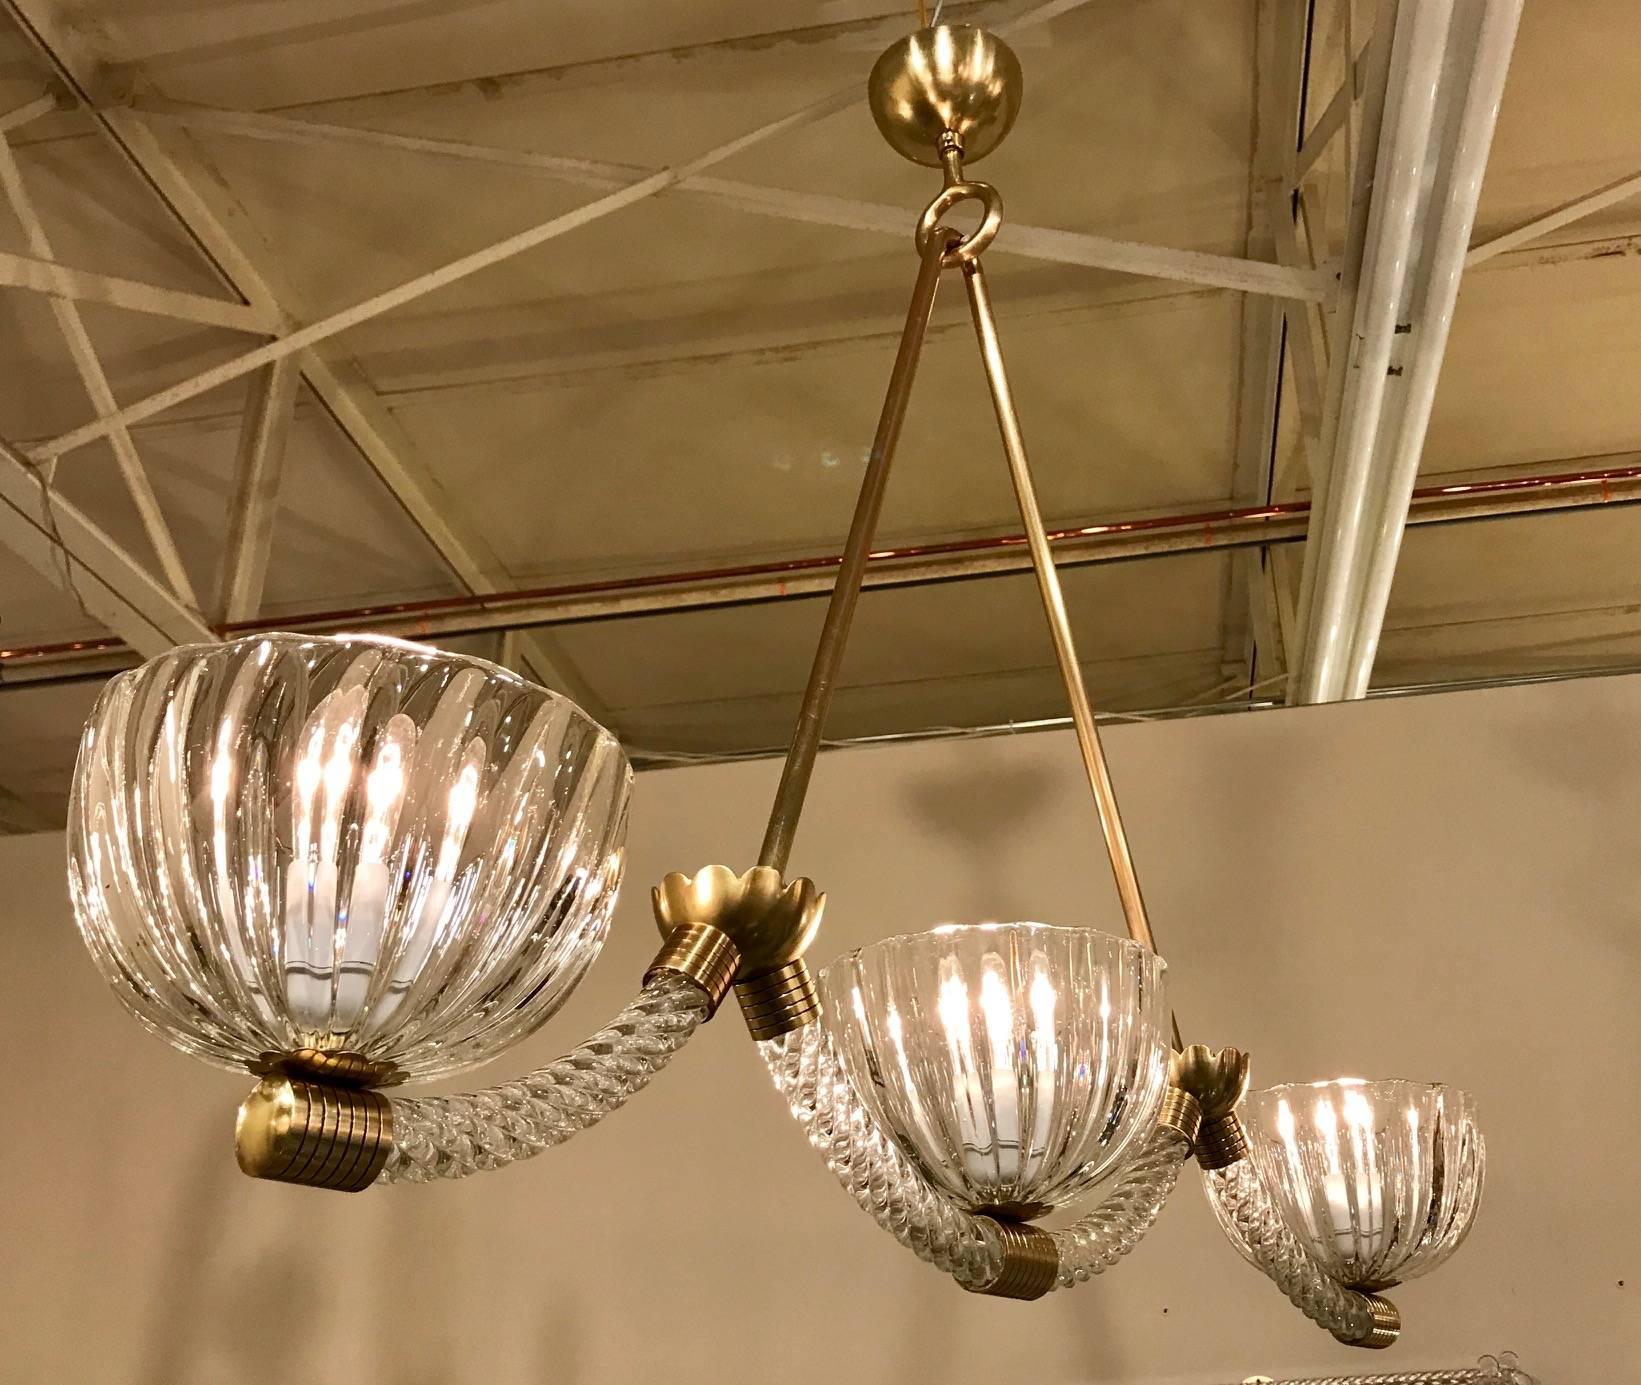 Barovier Murano glass three-light chandelier or pendant light fixture constructed from twisted ropes of clear glass and ribbed glass shades. Brass fittings feature a classic Barovier incised line motif. Newly wired for US, this light fixture uses